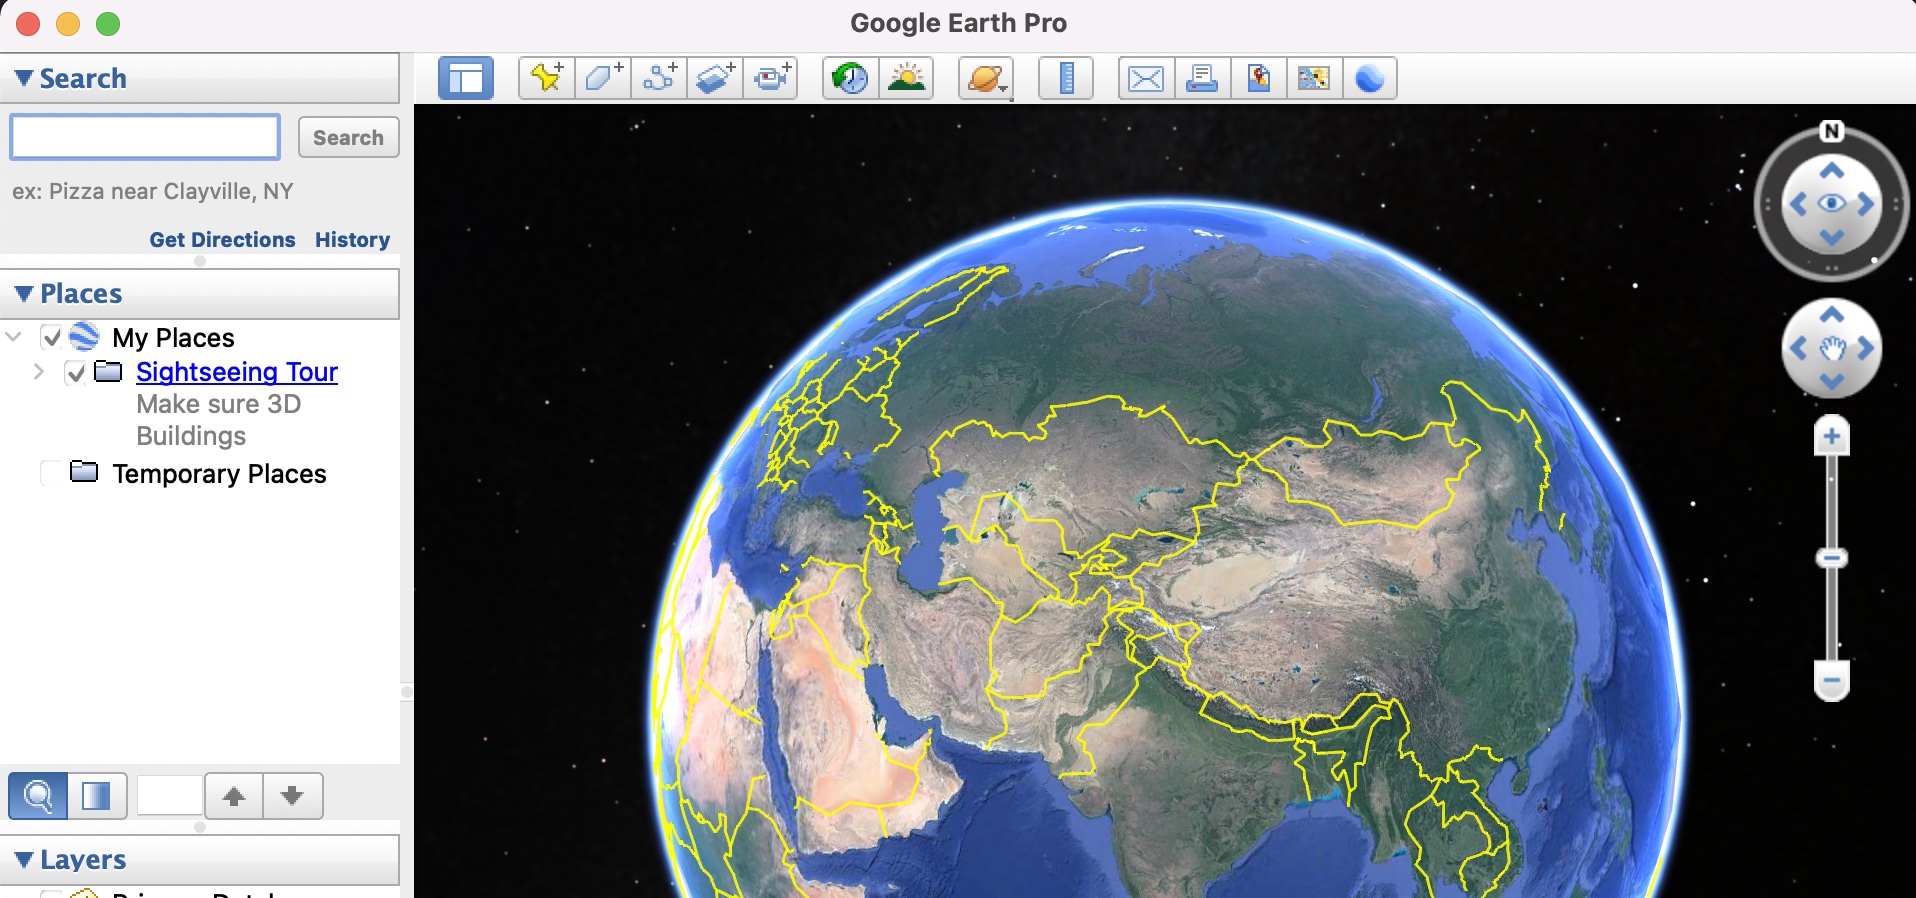 How to add an image icon to a place on Google Earth